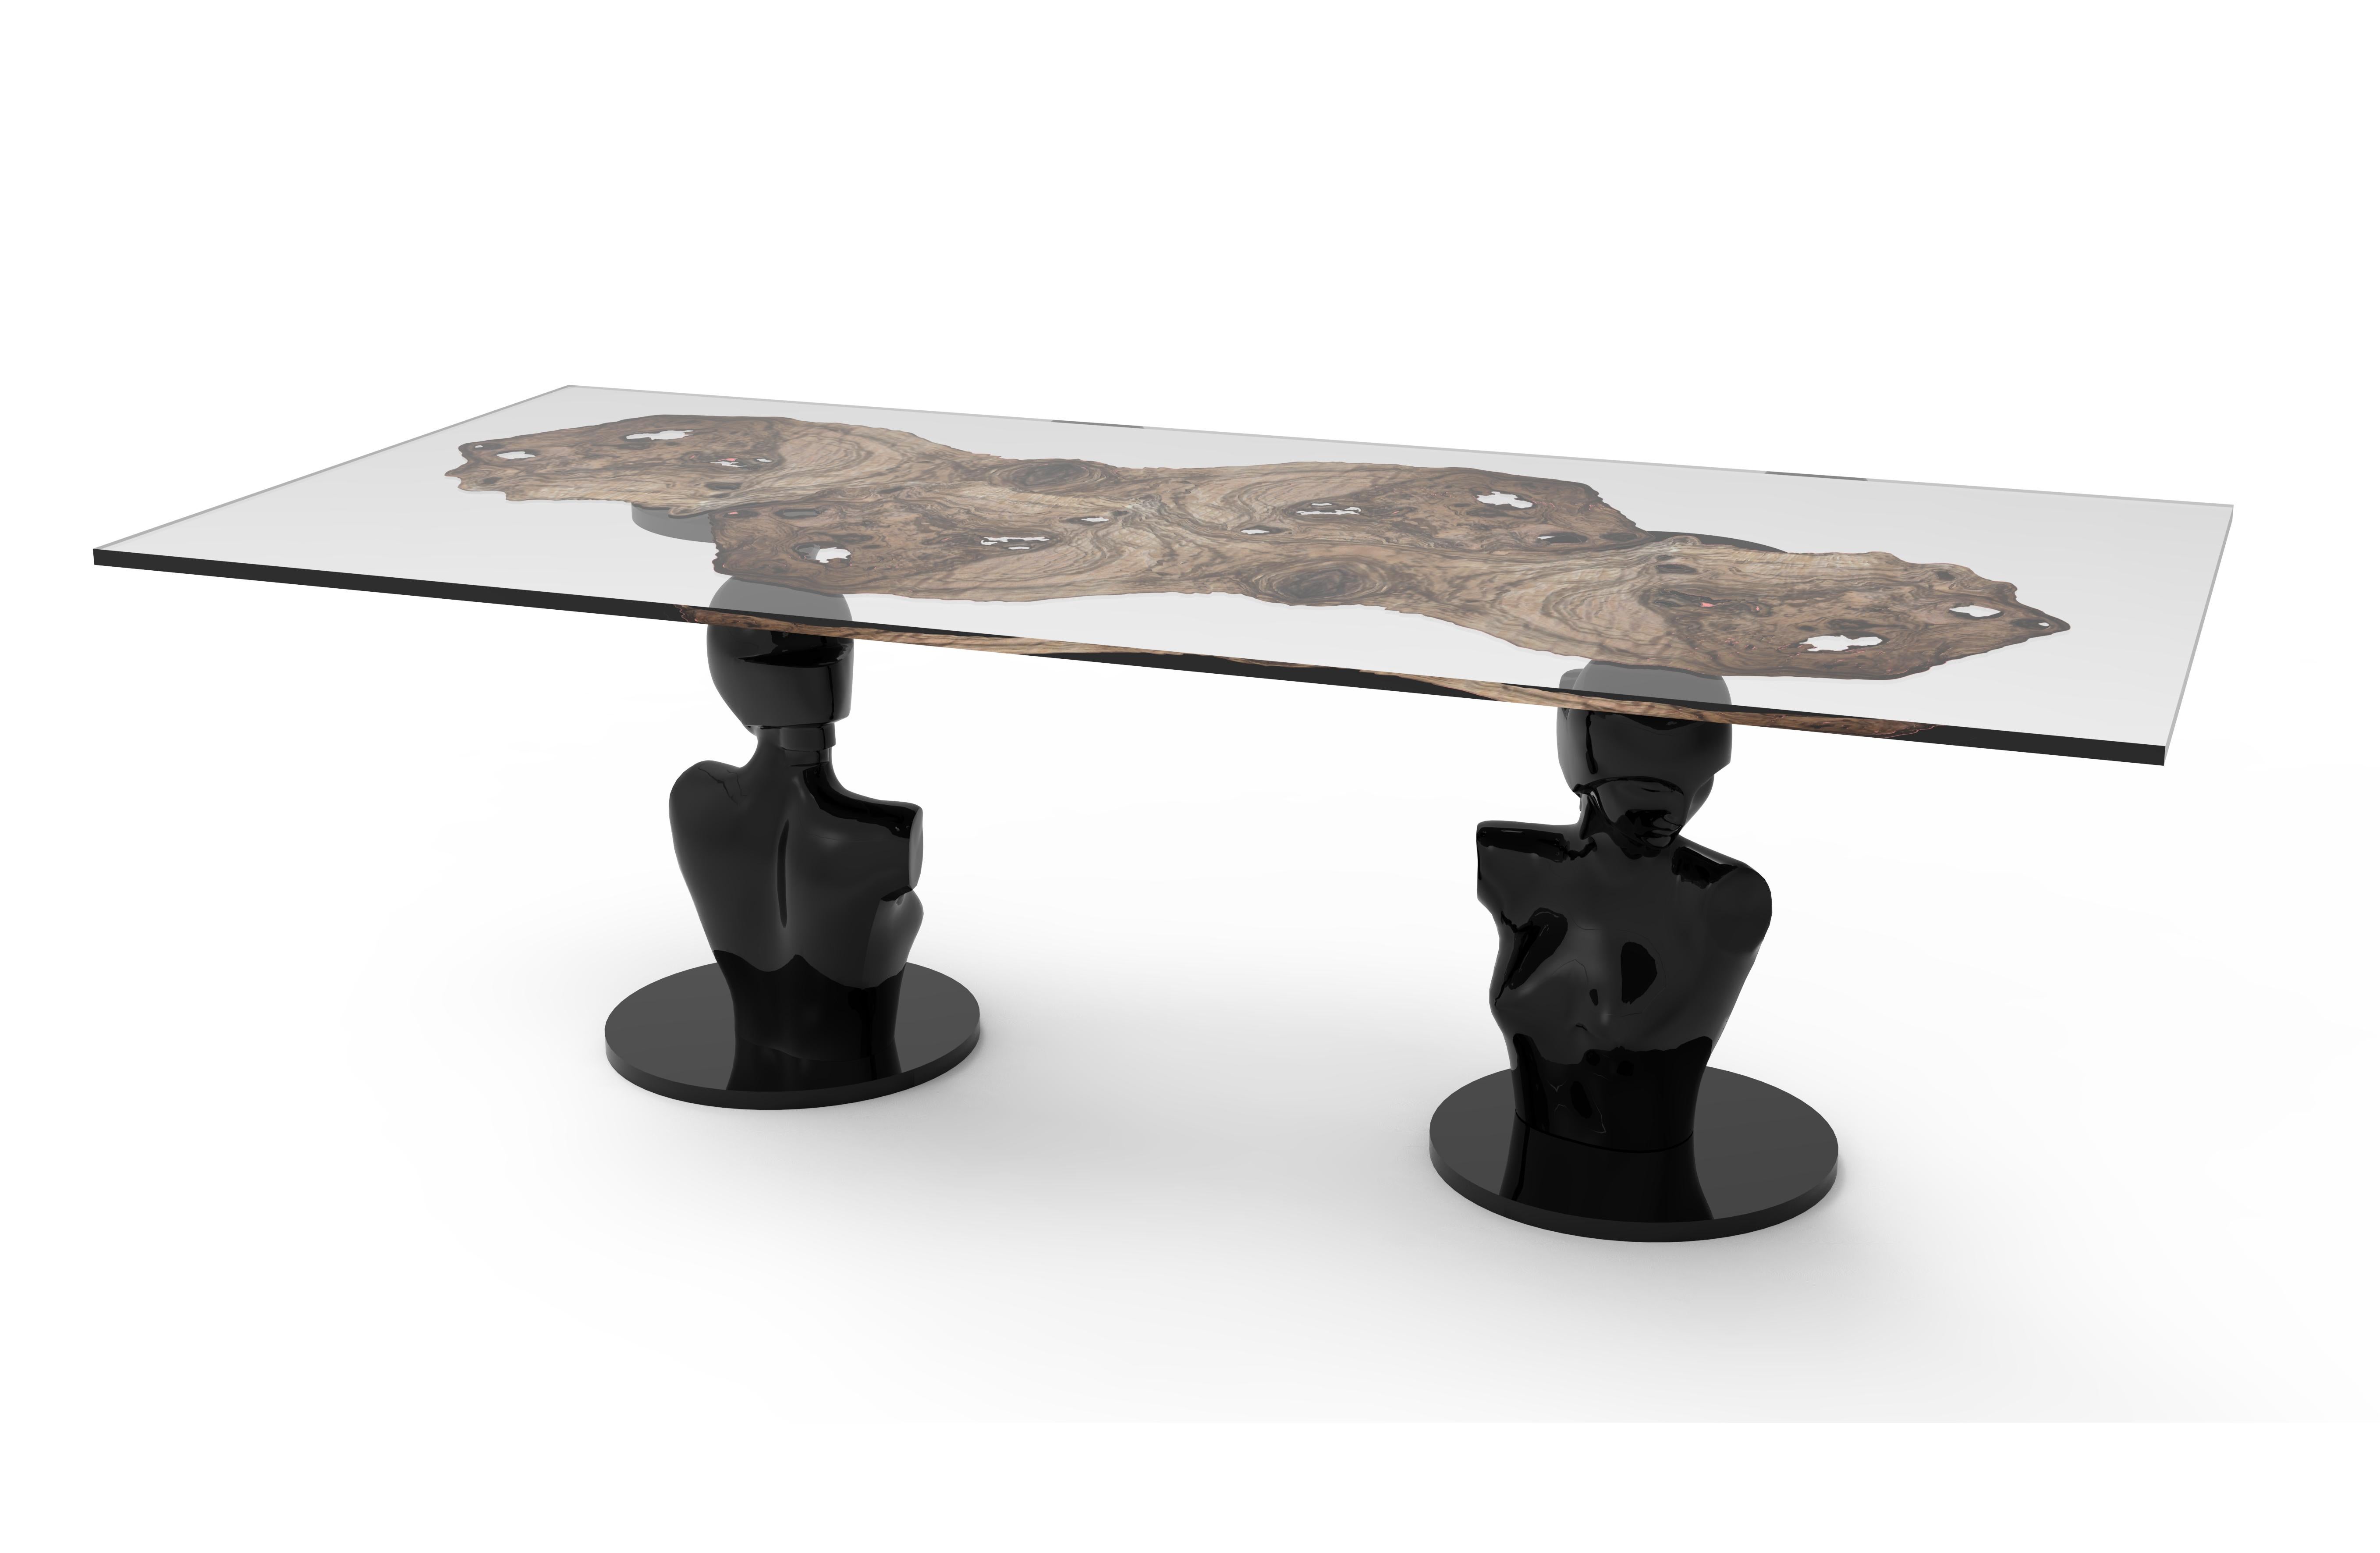 Lorsky is a table inspired by the Art Deco aesthetics of the 1920s and 1930s. The carved wooden base represents two sculptures of a warrior woman by Boris Lovet Lorski, one of the most important Art Deco sculptors. The table is a tribute to the